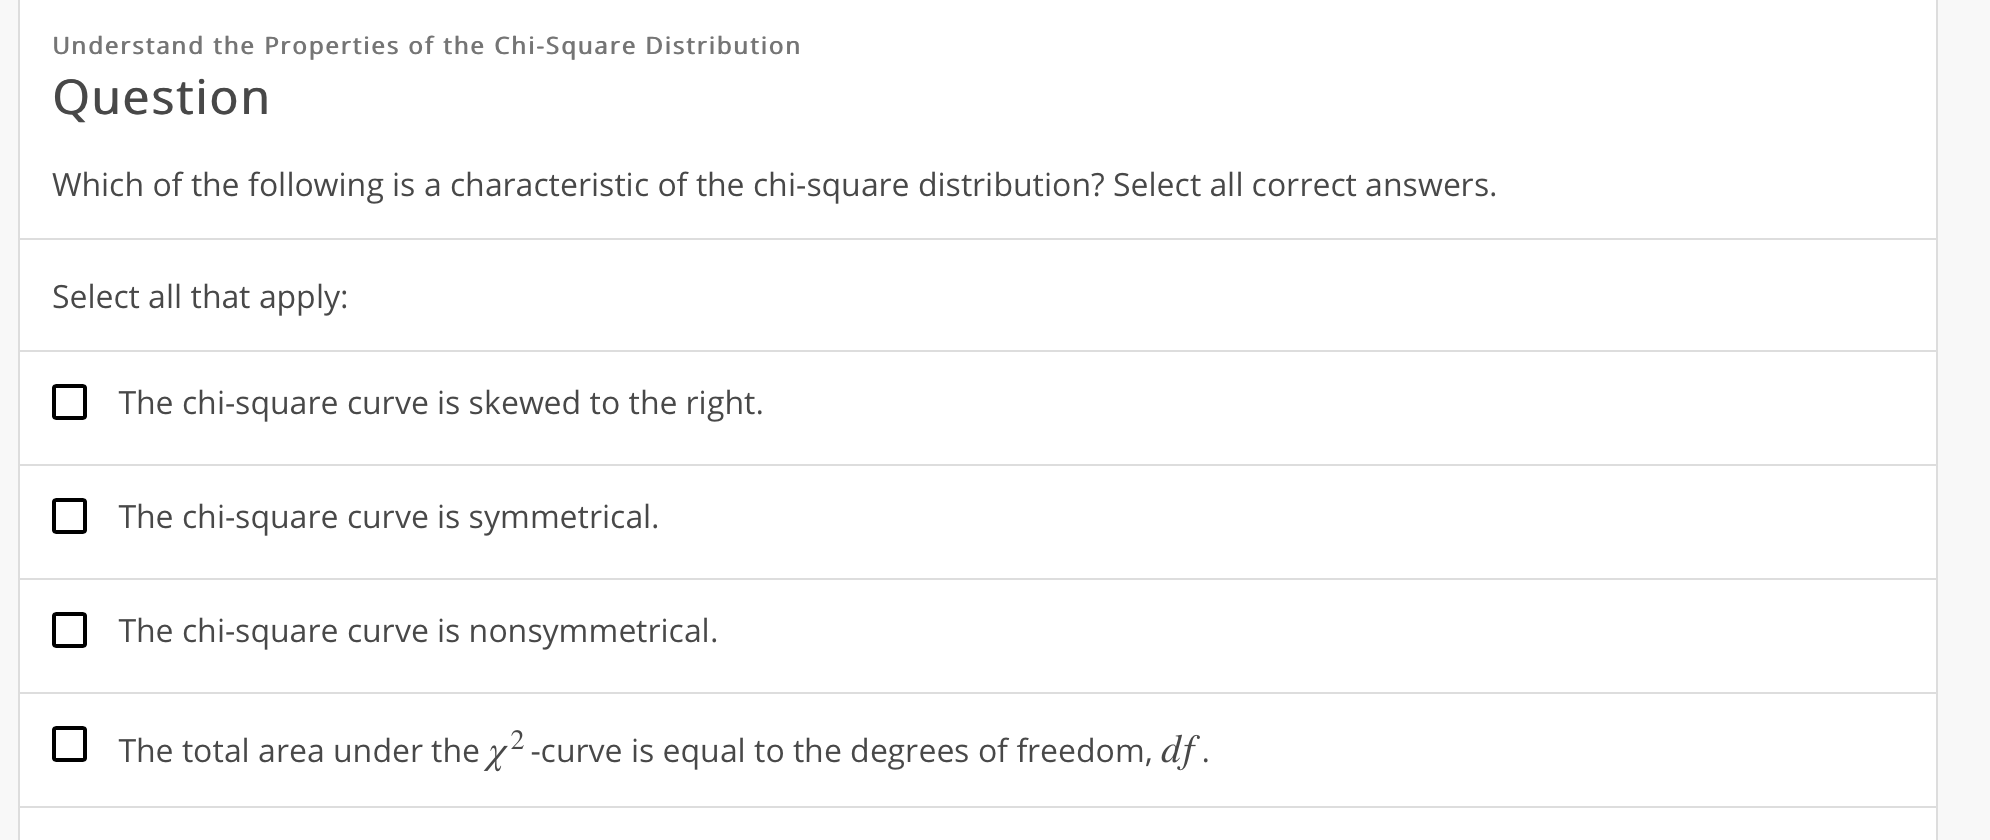 Understand the Properties of the Chi-Square Distribution
Question
Which of the following is a characteristic of the chi-square distribution? Select all correct answers.
Select all that apply:
The chi-square curve is skewed to the right.
The chi-square curve is symmetrical.
The chi-square curve is nonsymmetrical.
The total area under the χ2-curve is equal to the degrees of freedom,df
